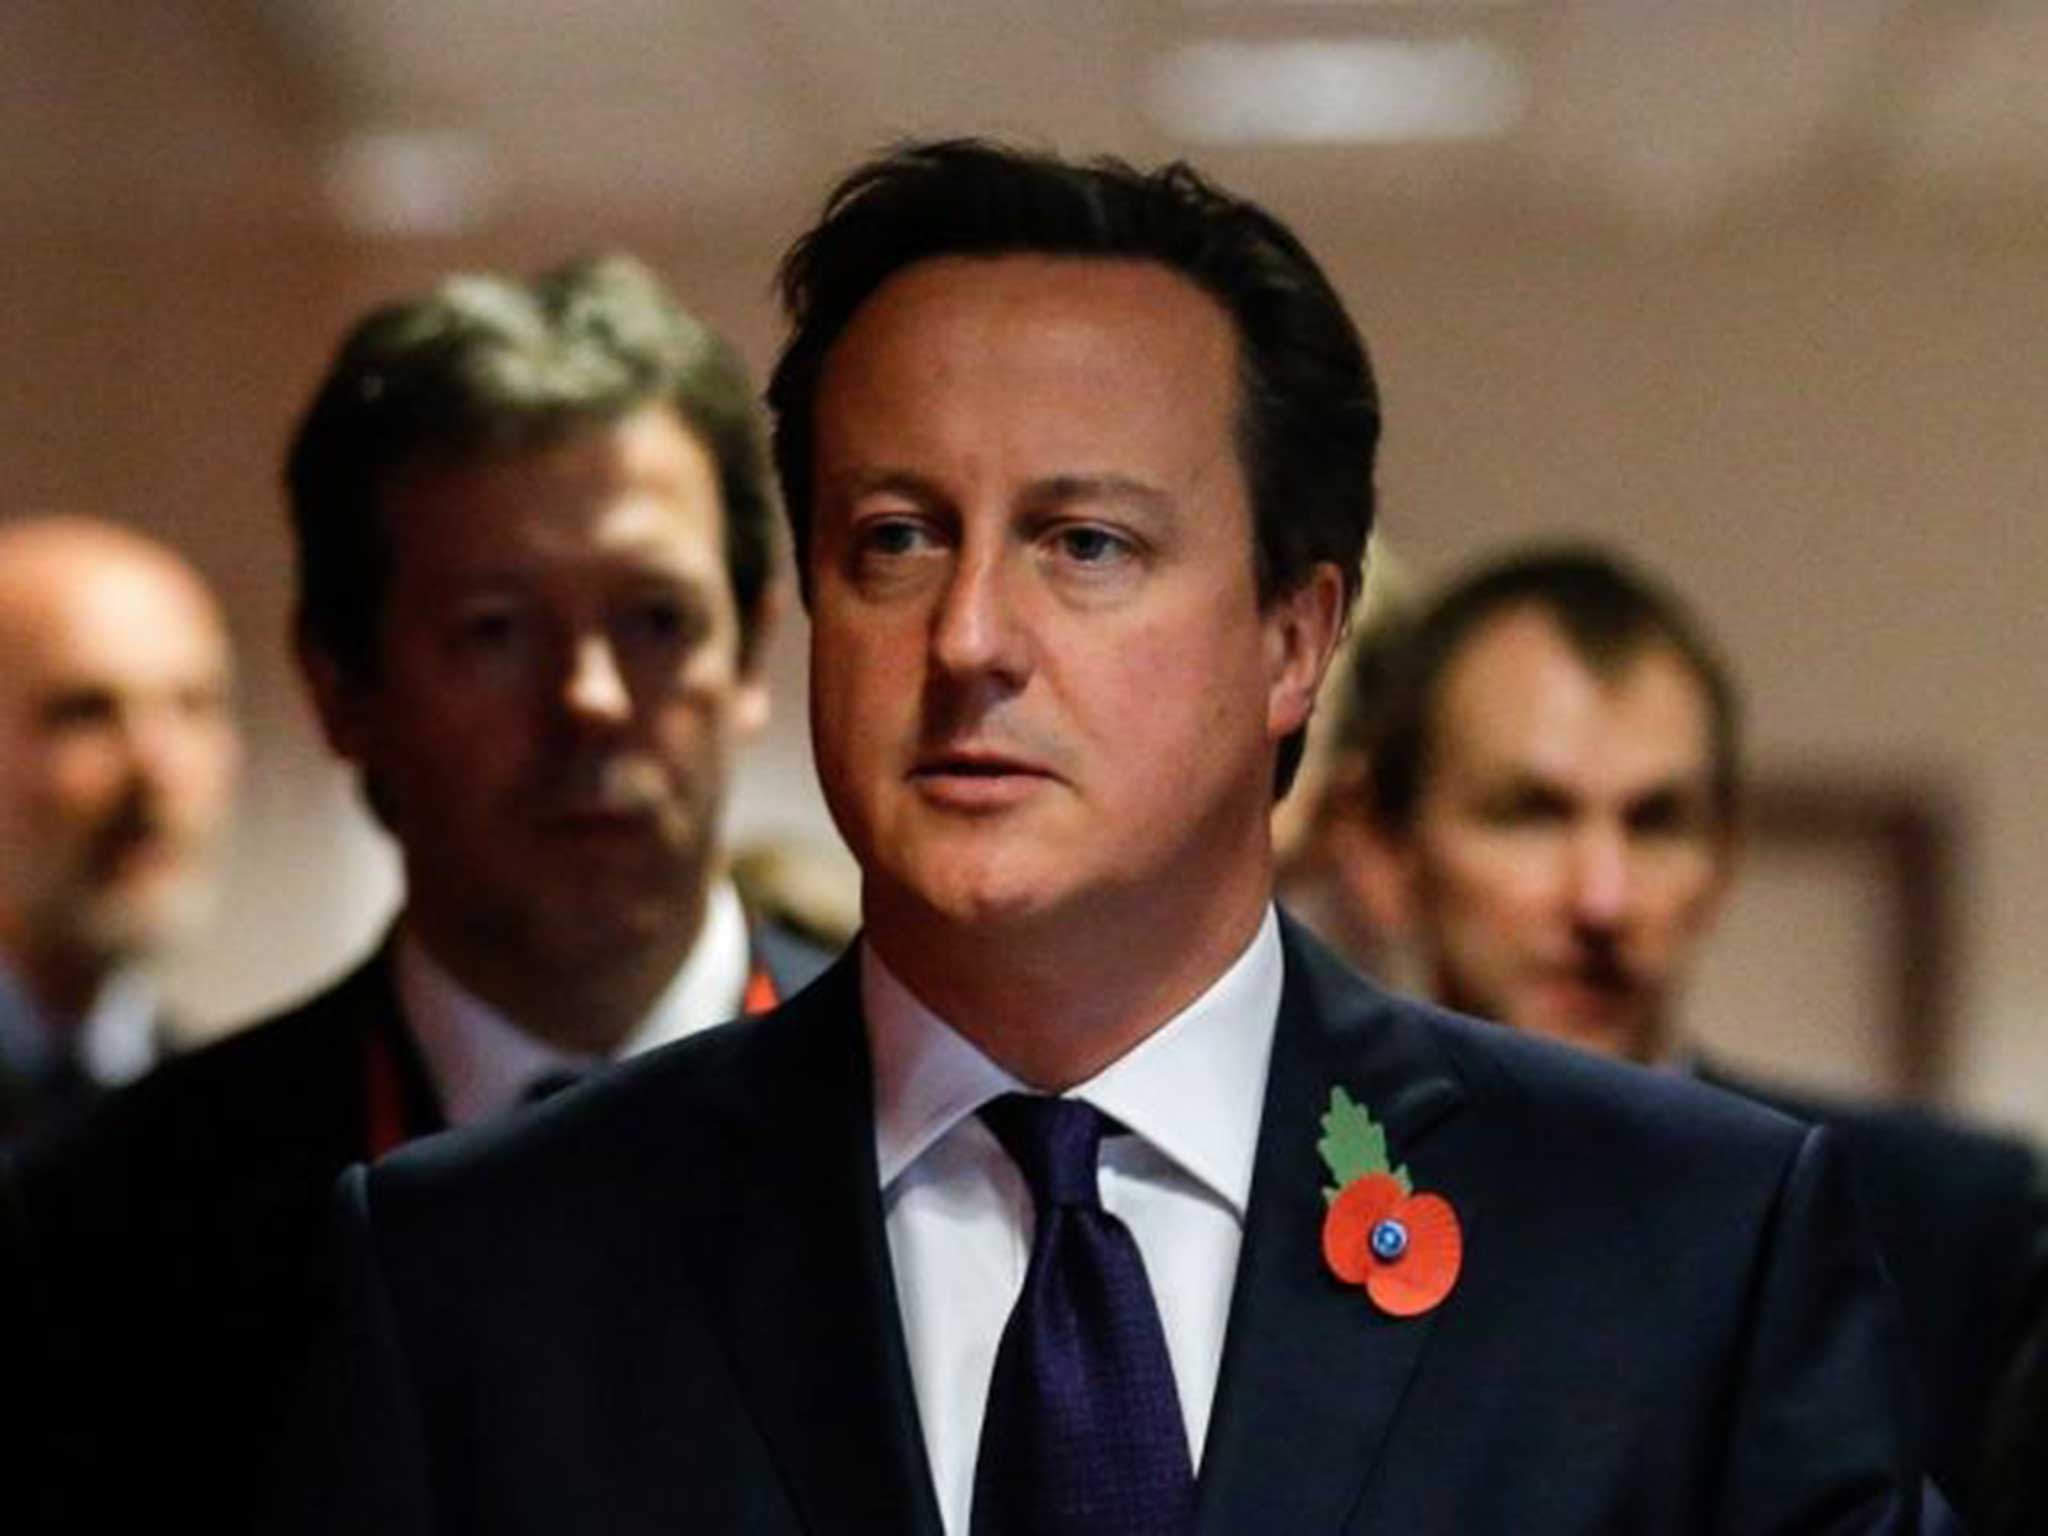 Cameron has expressed his frustration with the EU